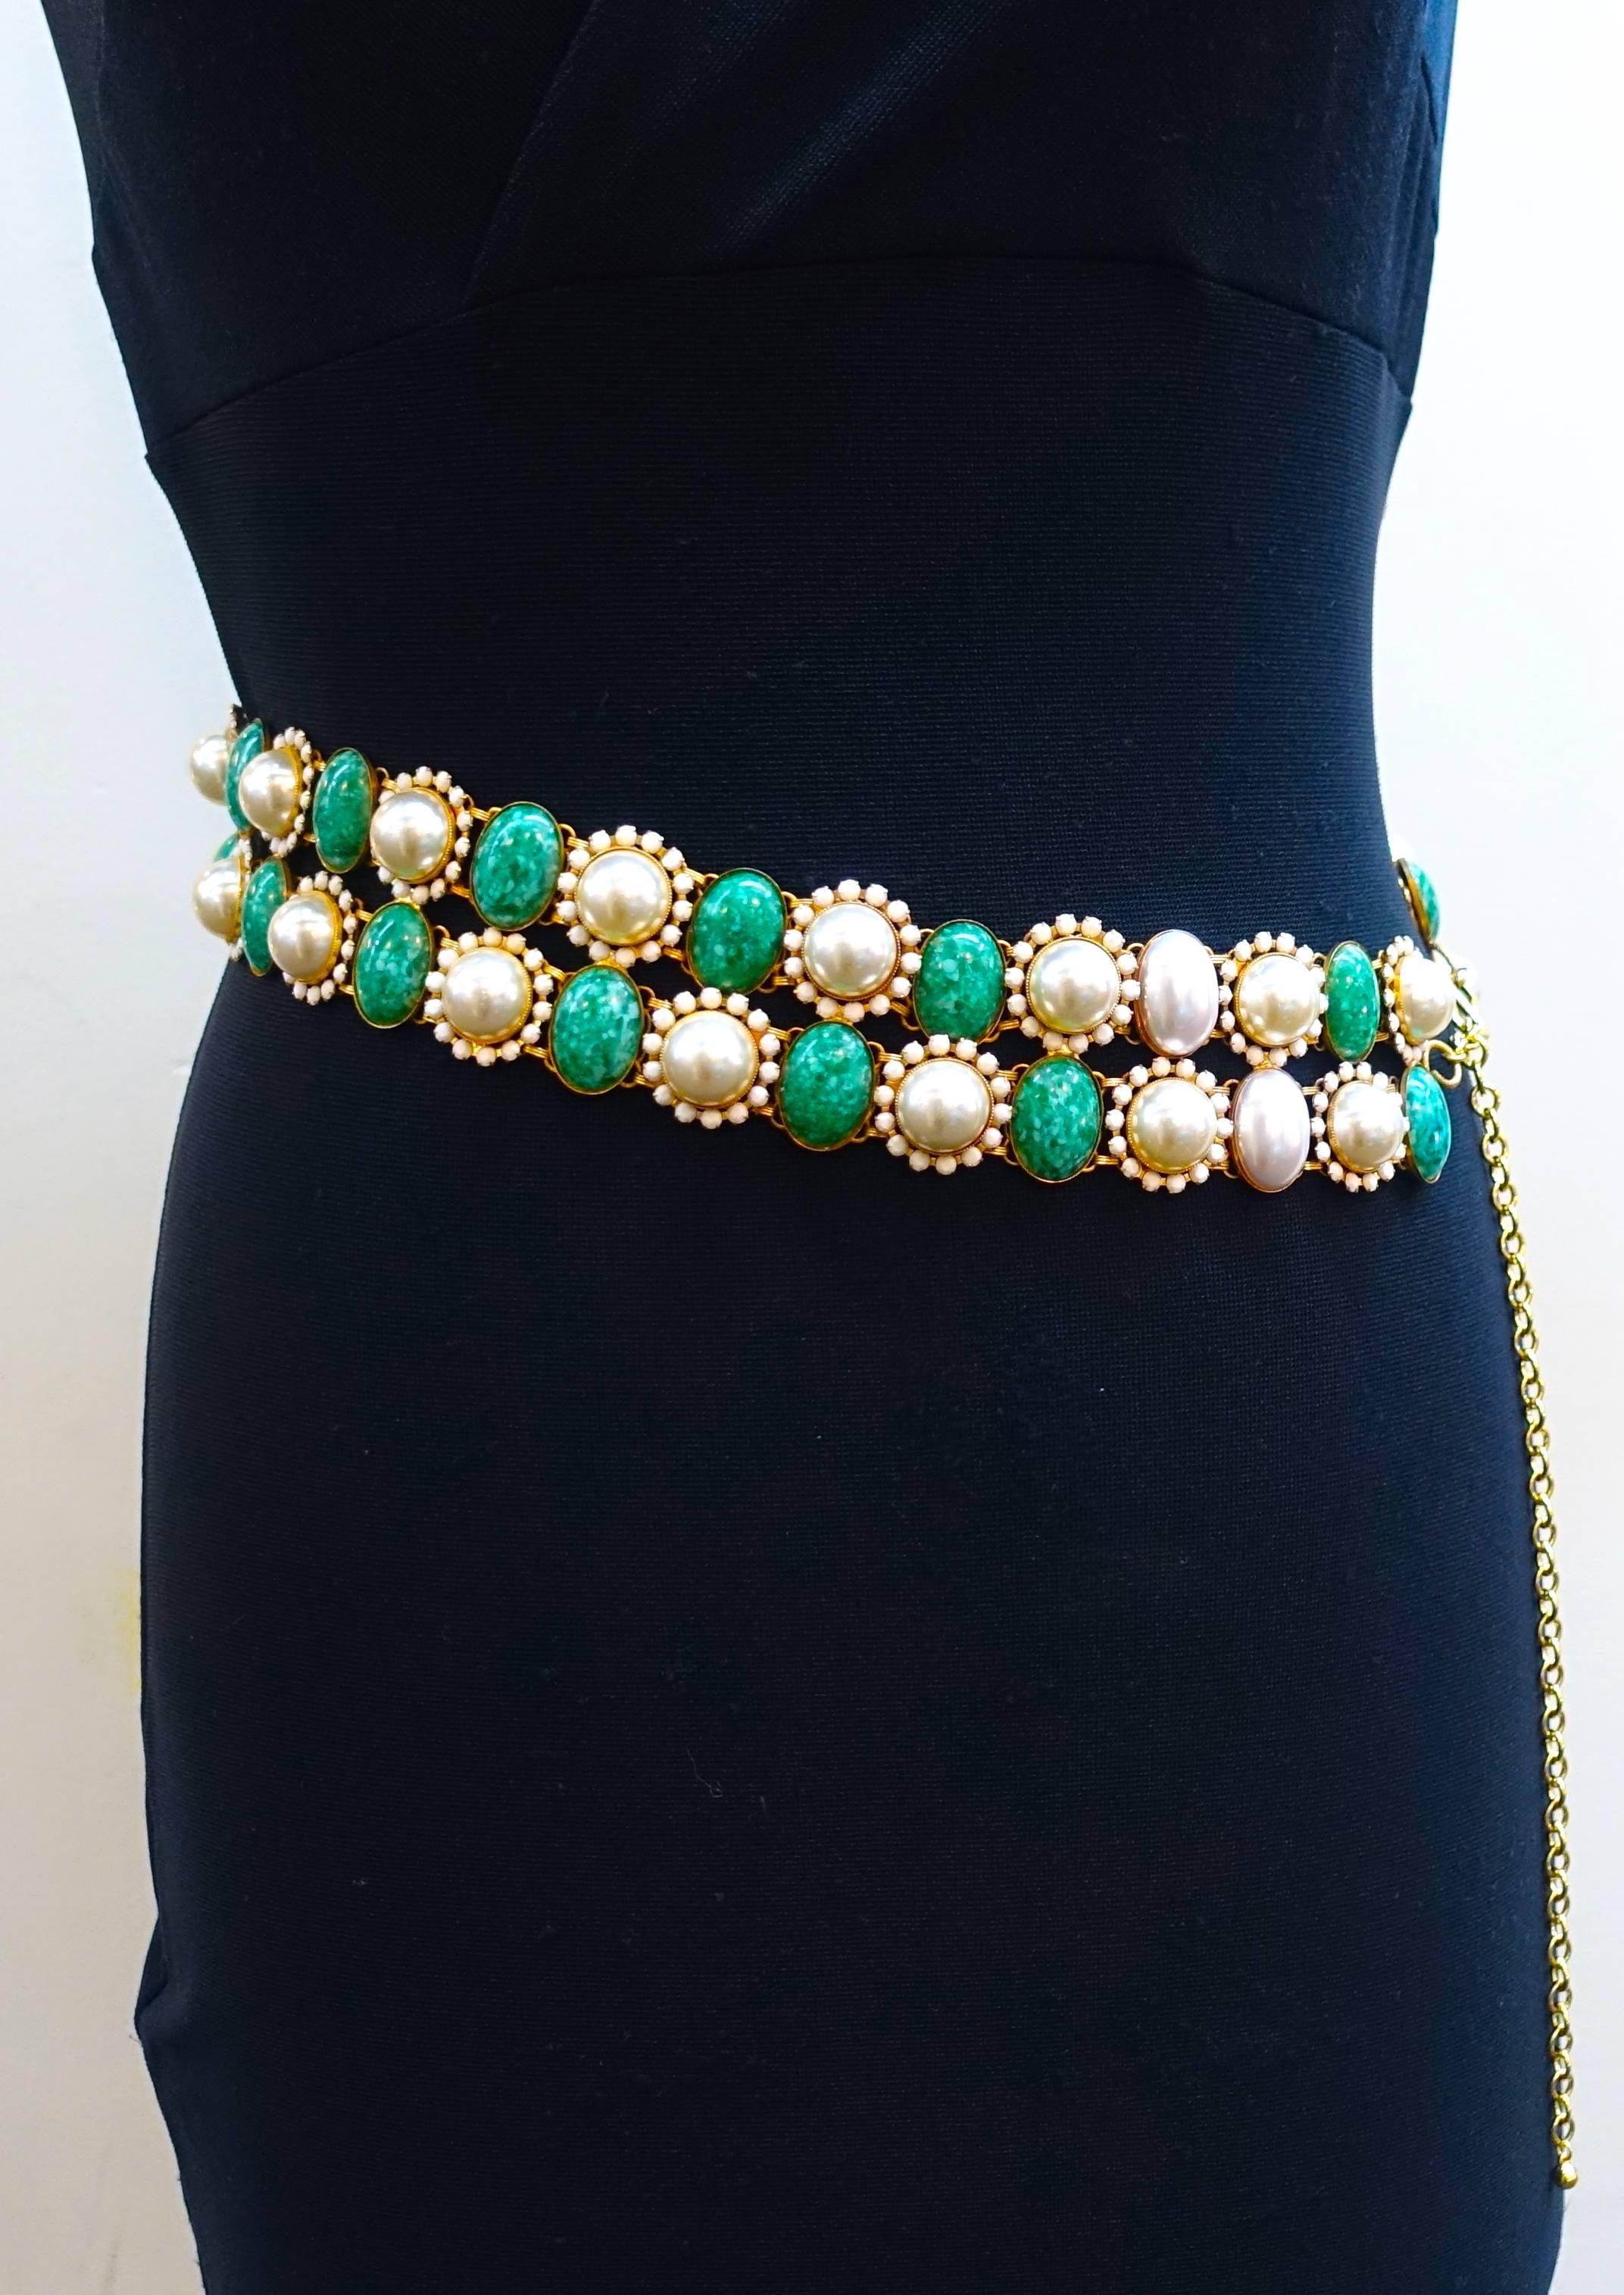 This is an extremely rare 1960’s Kenneth Jay Lane belt.  It has faux white pearls surrounded with small white glass stones giving it a floral look. Alternating with the faux pearls are oval green marbleized stones … all set in a gold tone metal